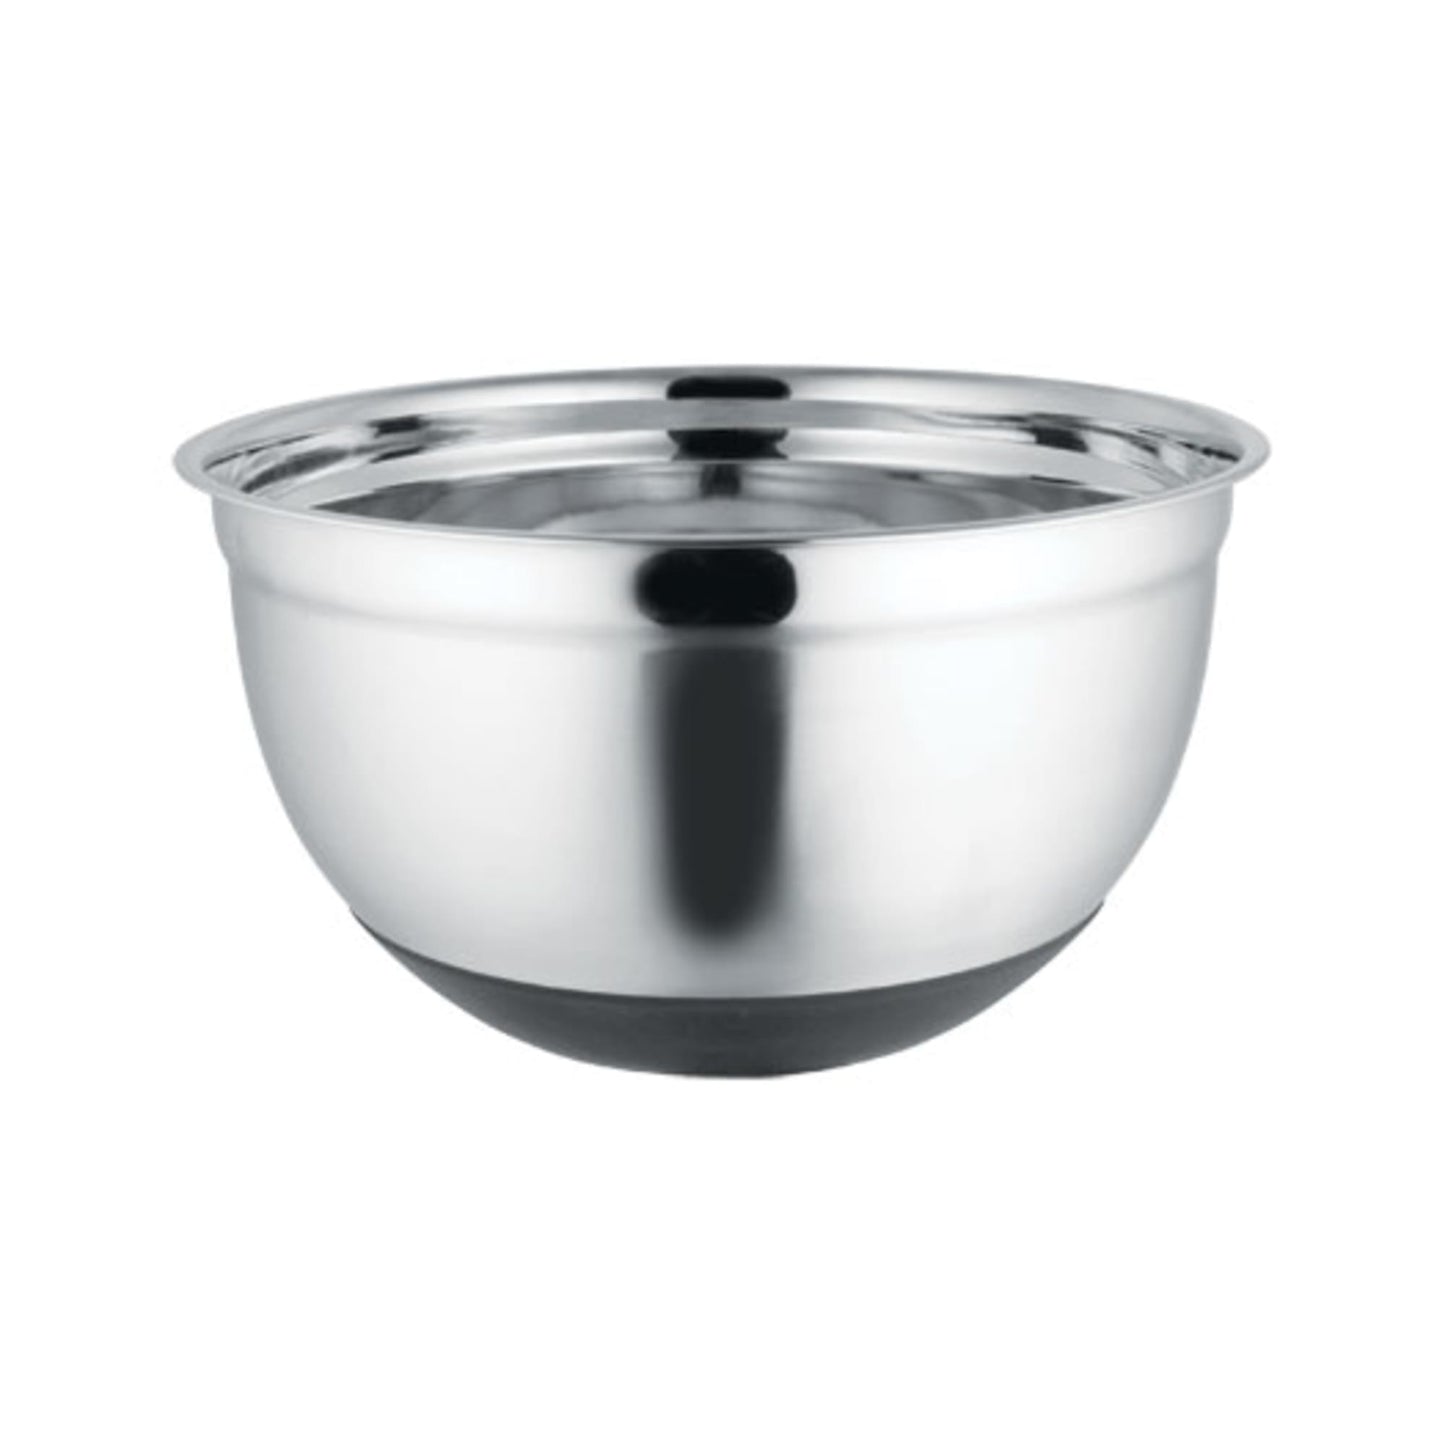 Stainless Steel Mixing Bowl with Anti-Skid Base